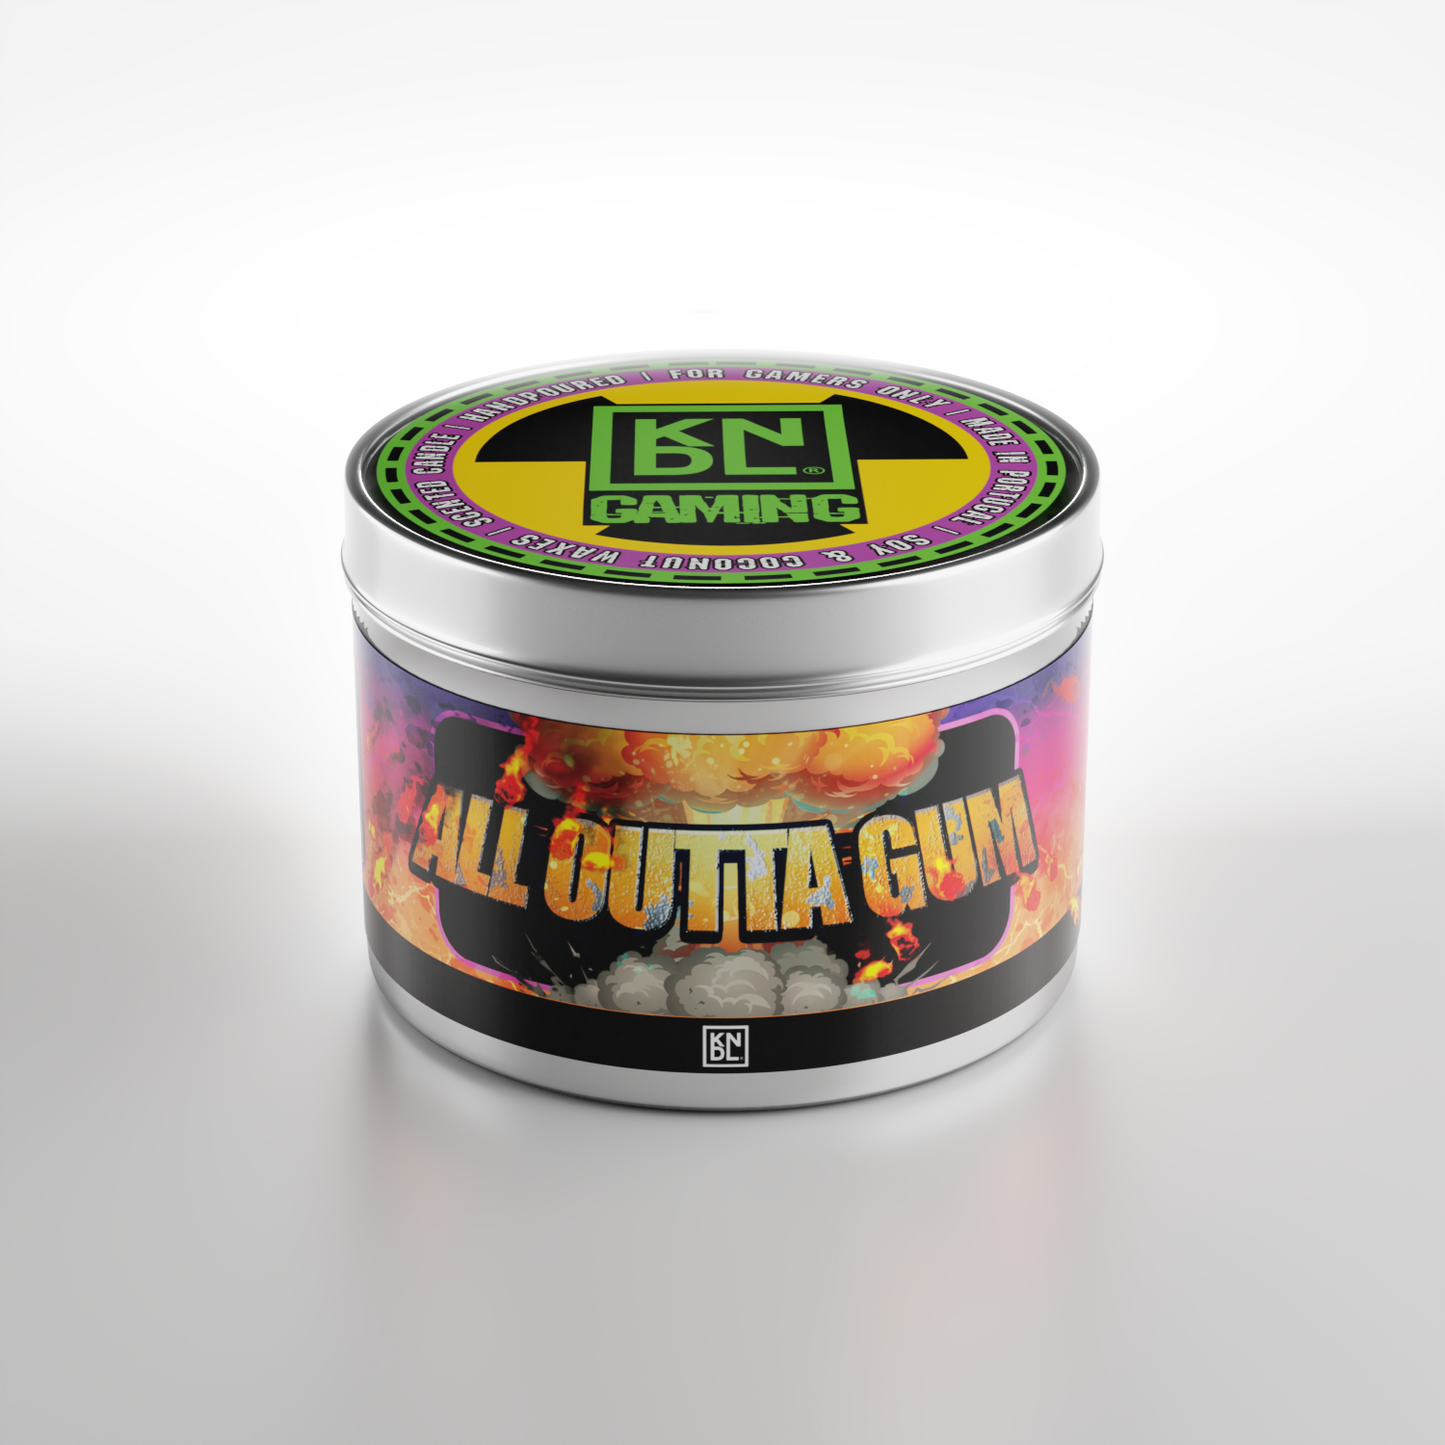 TIN NR 01 | ALL OUTTA GUM | DUKE NUKEM INSPIRED SCENTED CANDLE